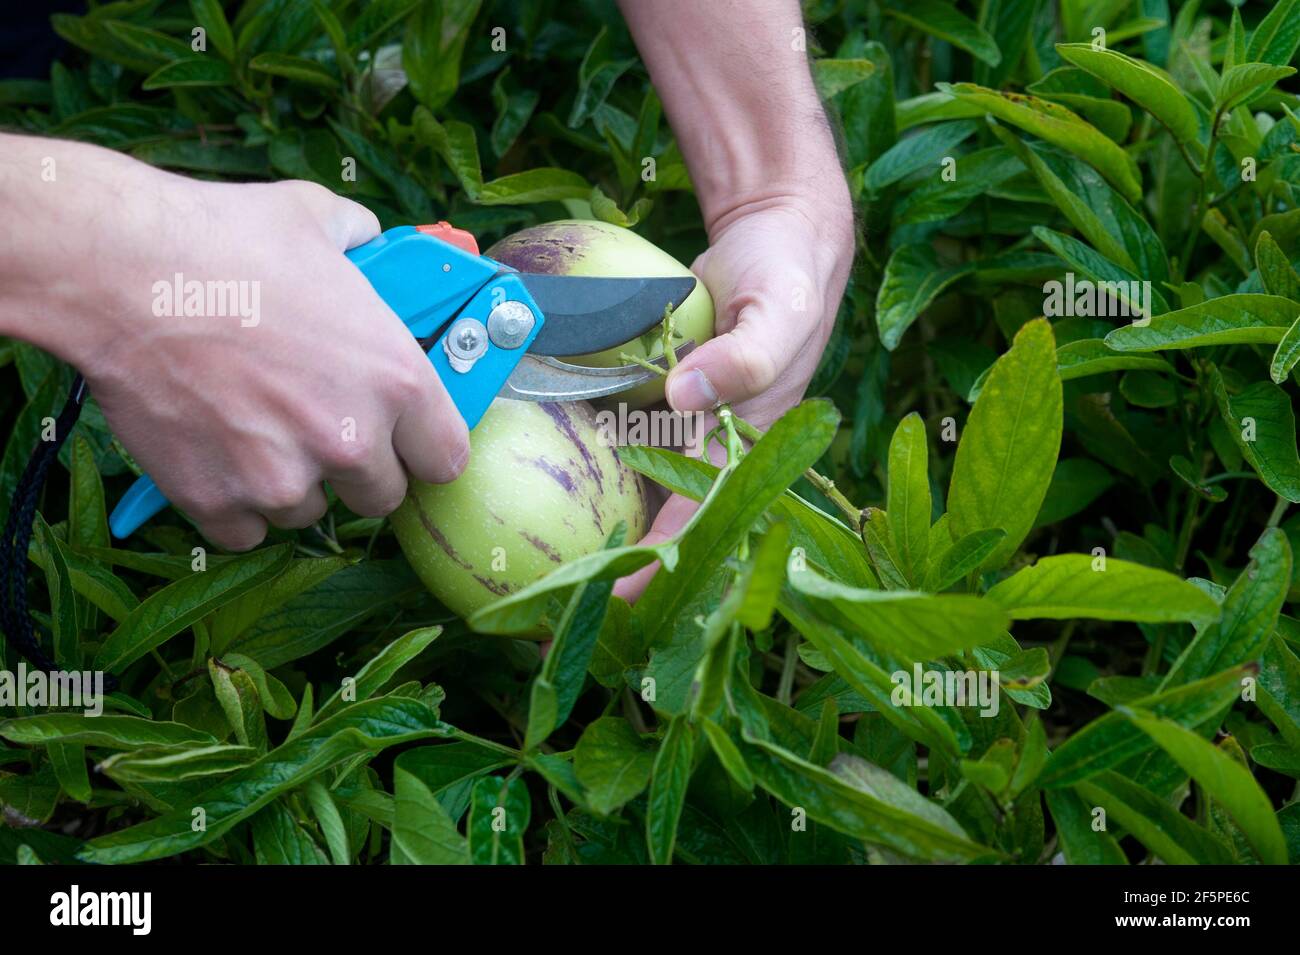 Man's hand cutting two pepino dulce or Solanum muricatum with robust garden scissors. South American delicious fruit also known as sweet cucumber. Stock Photo